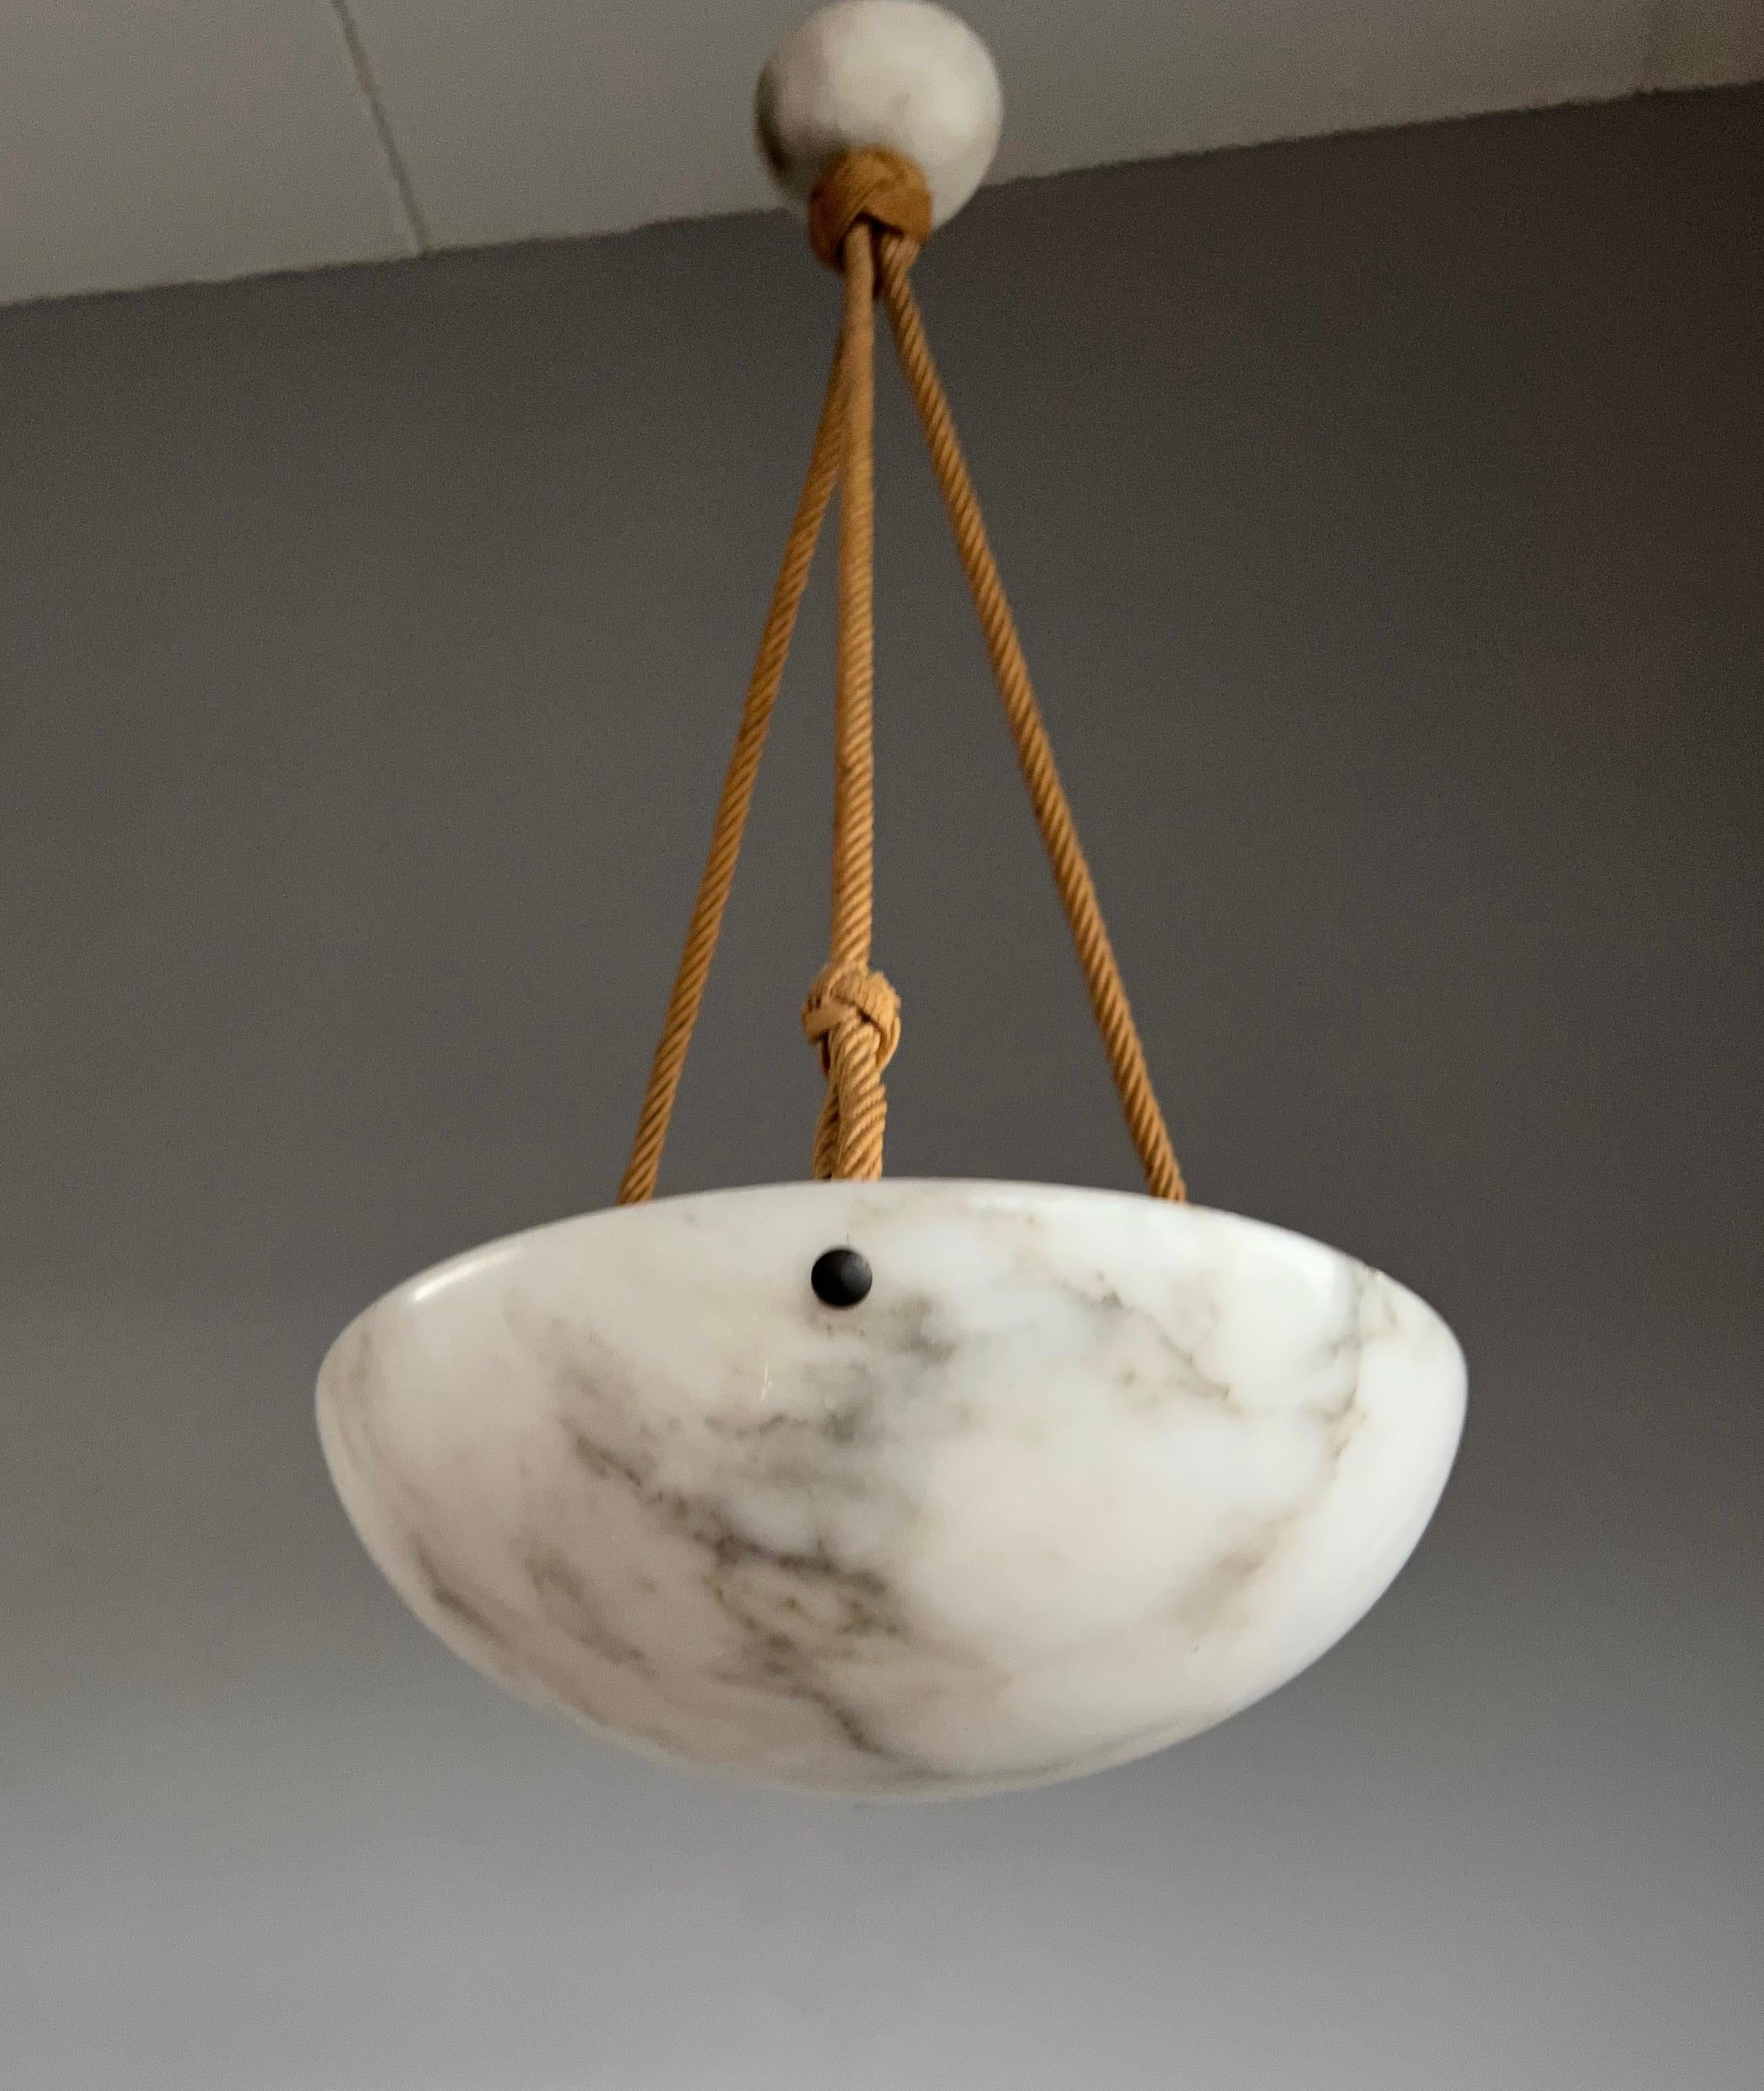 Marvelous antique light fixture for an entry hall, bedroom or any other small room.

With early 20th century light fixtures being one of our specialities, we always love finding timeless pendants. This particular work of beauty comes with a very